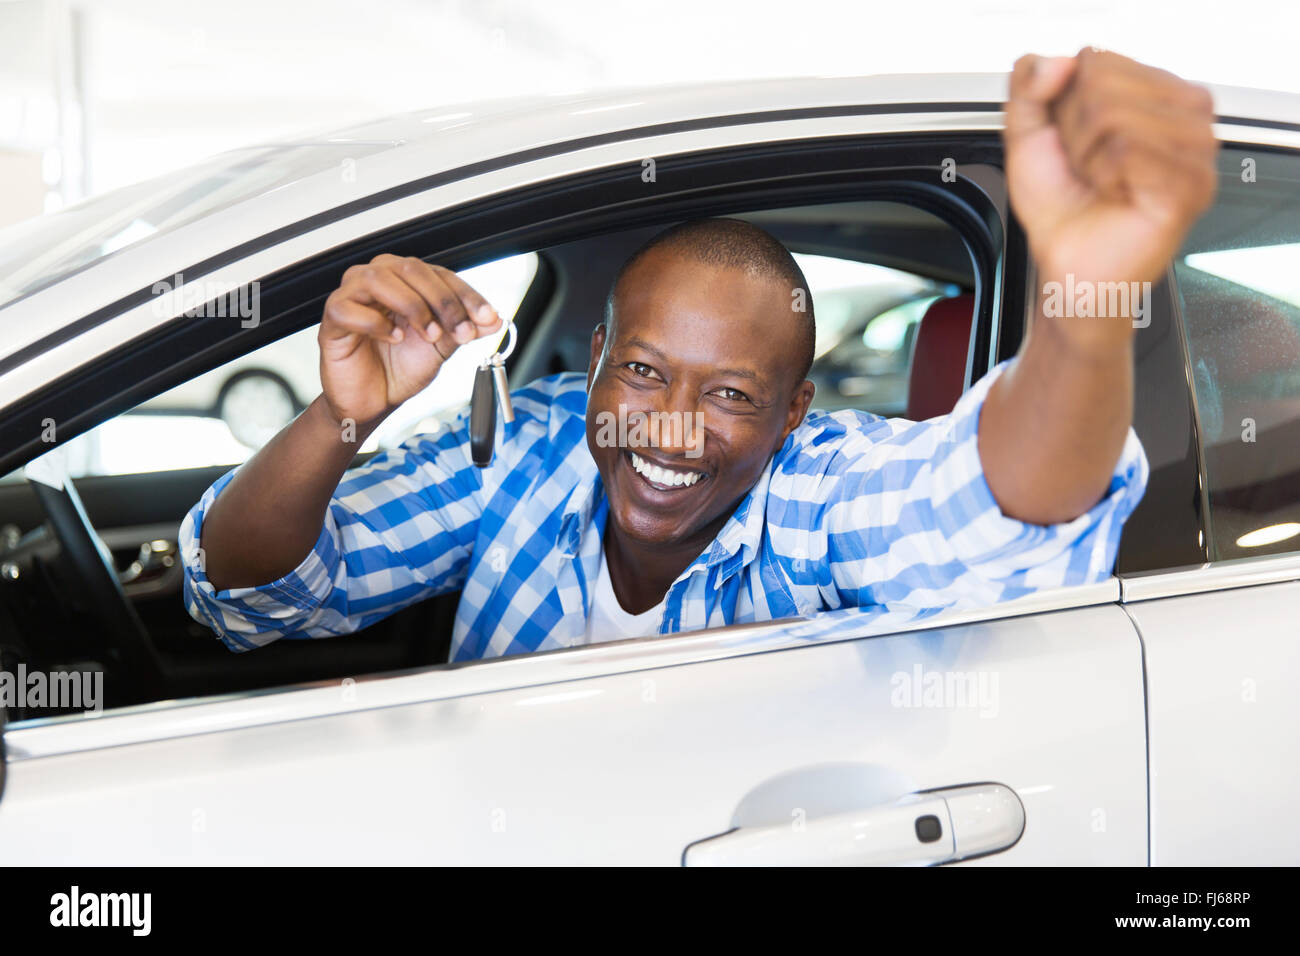 excited African man showing a car key inside his new vehicle Stock Photo